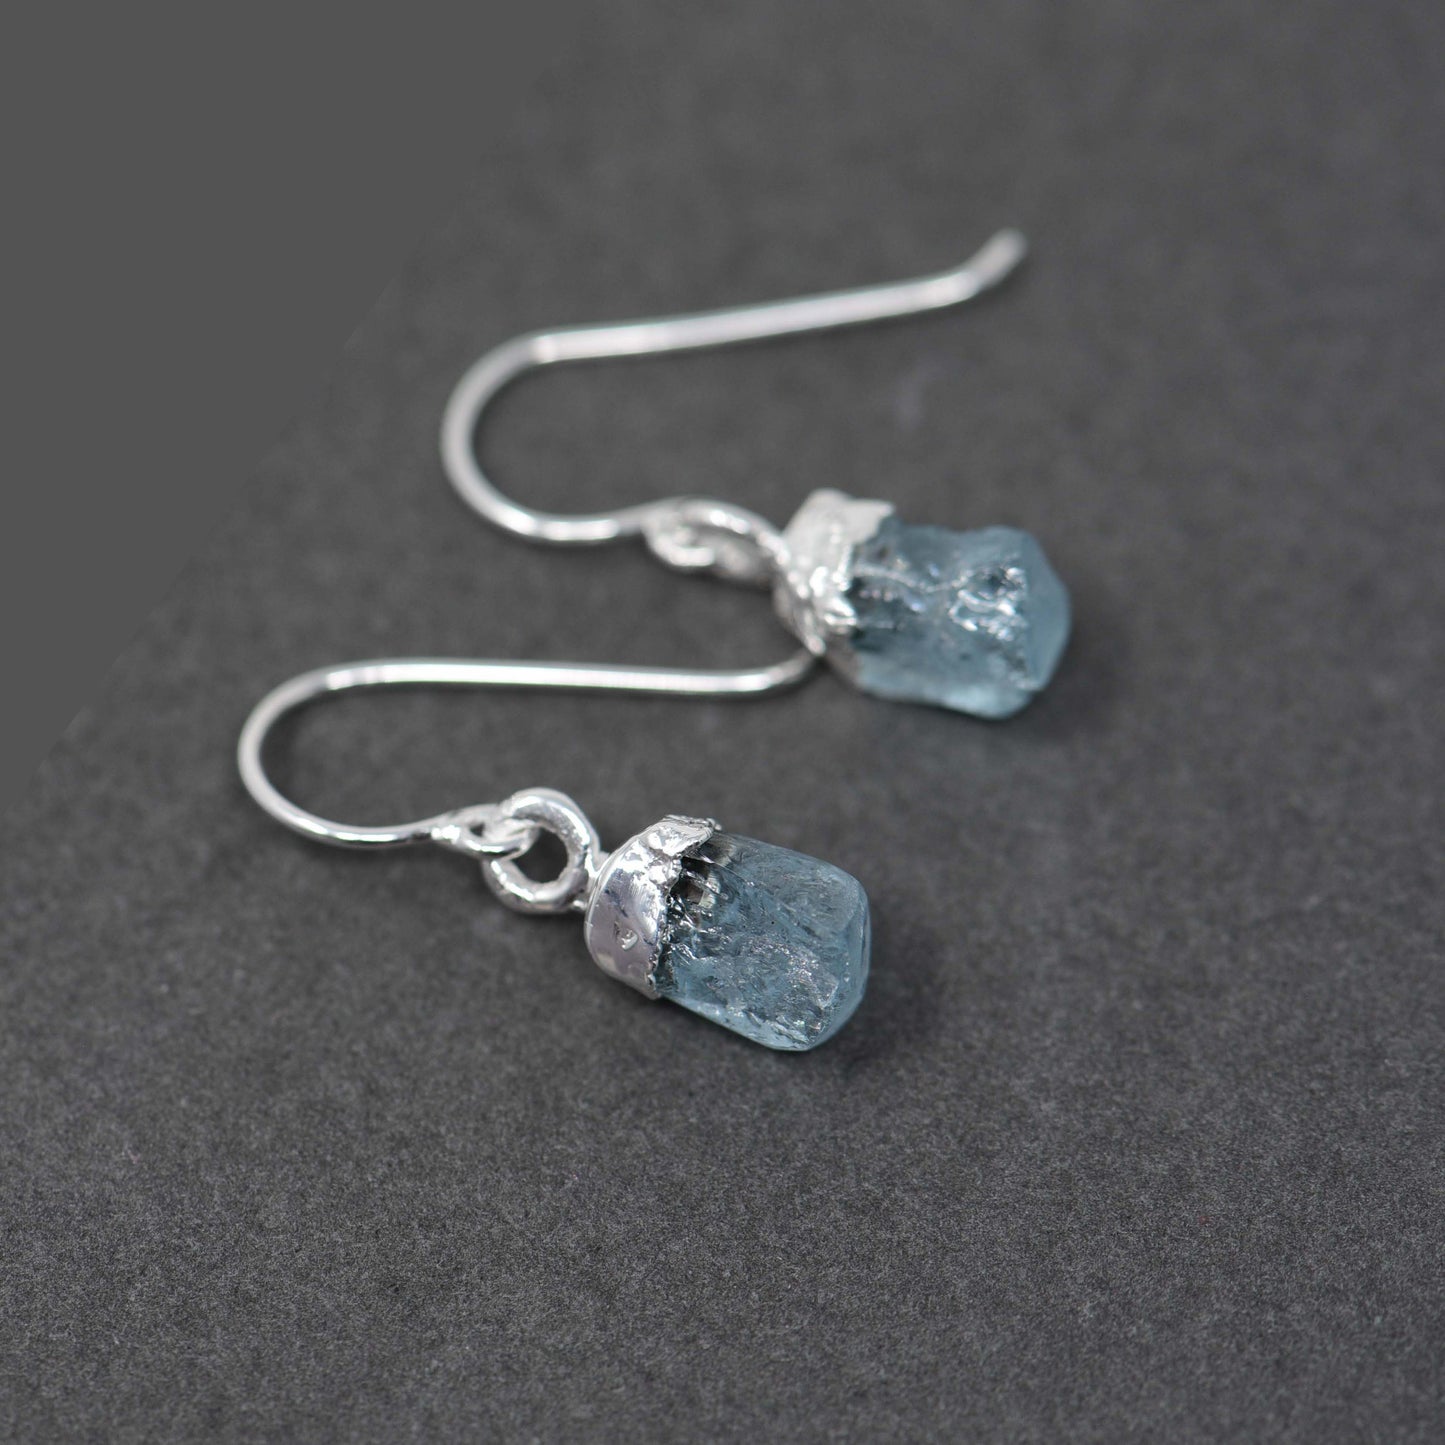 Silver hook earrings with Rough Aquamarine